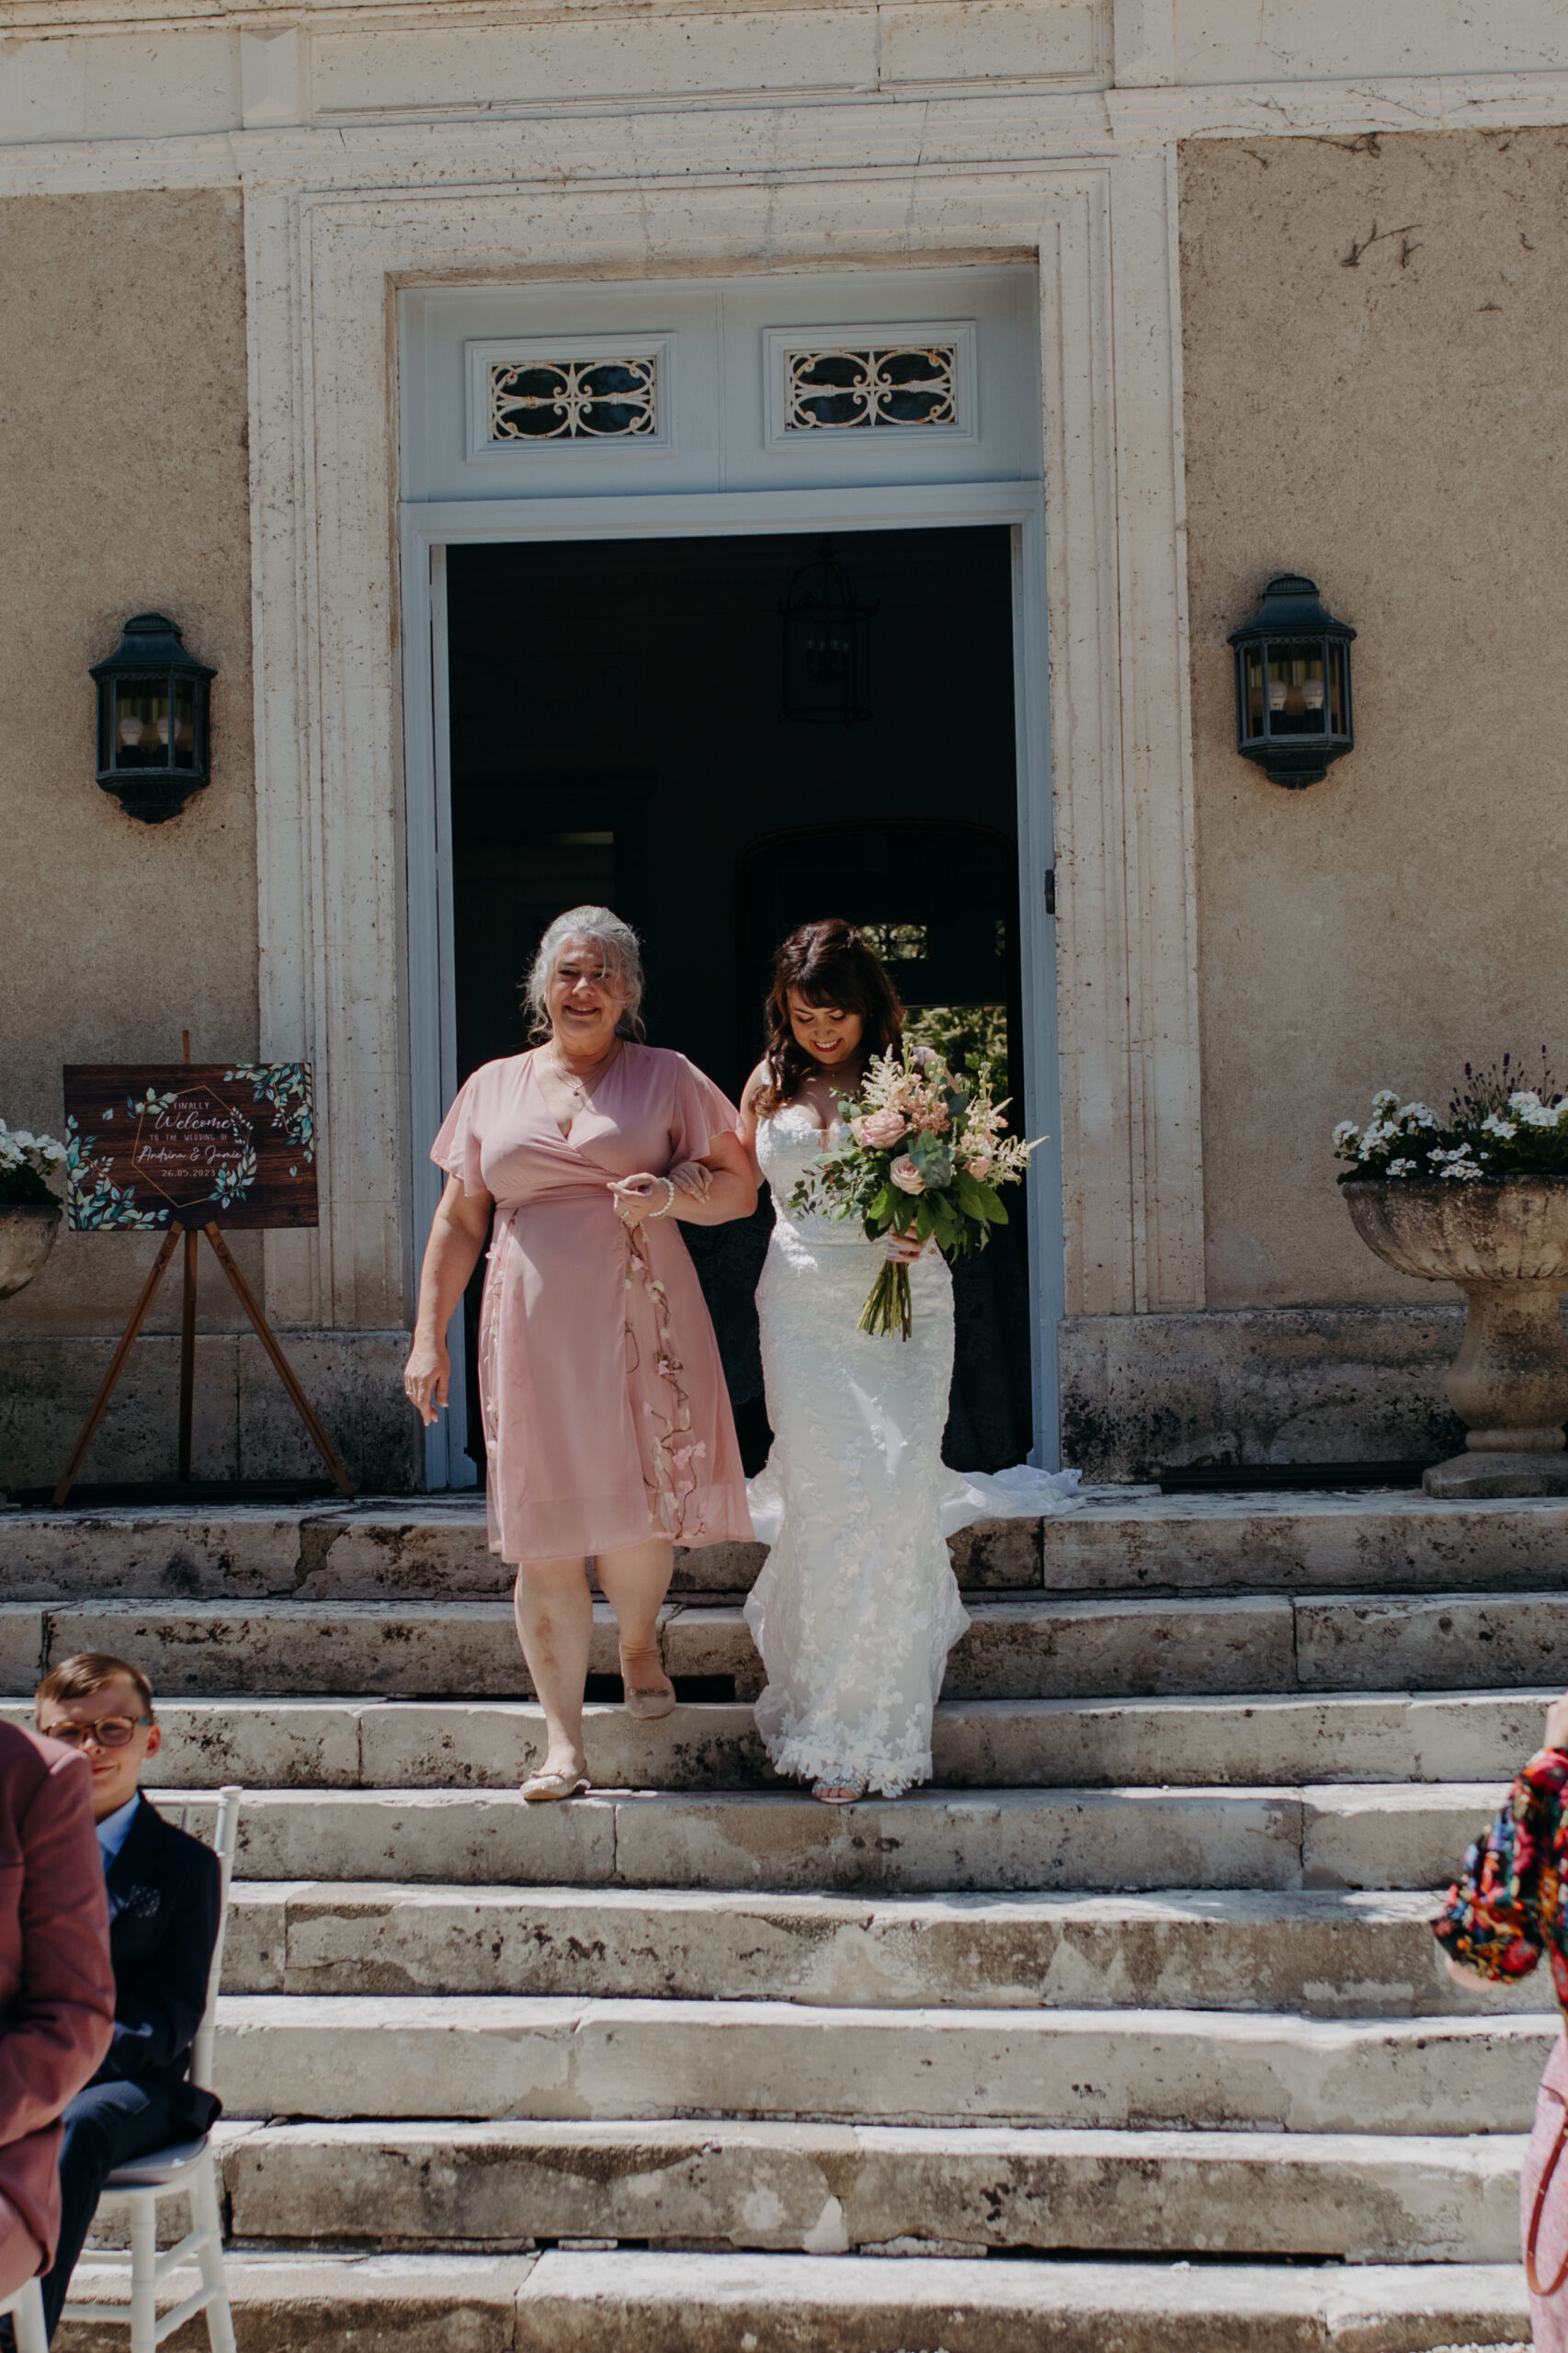 A woman in a pink dress walks a bride in a white dress happily down stairs